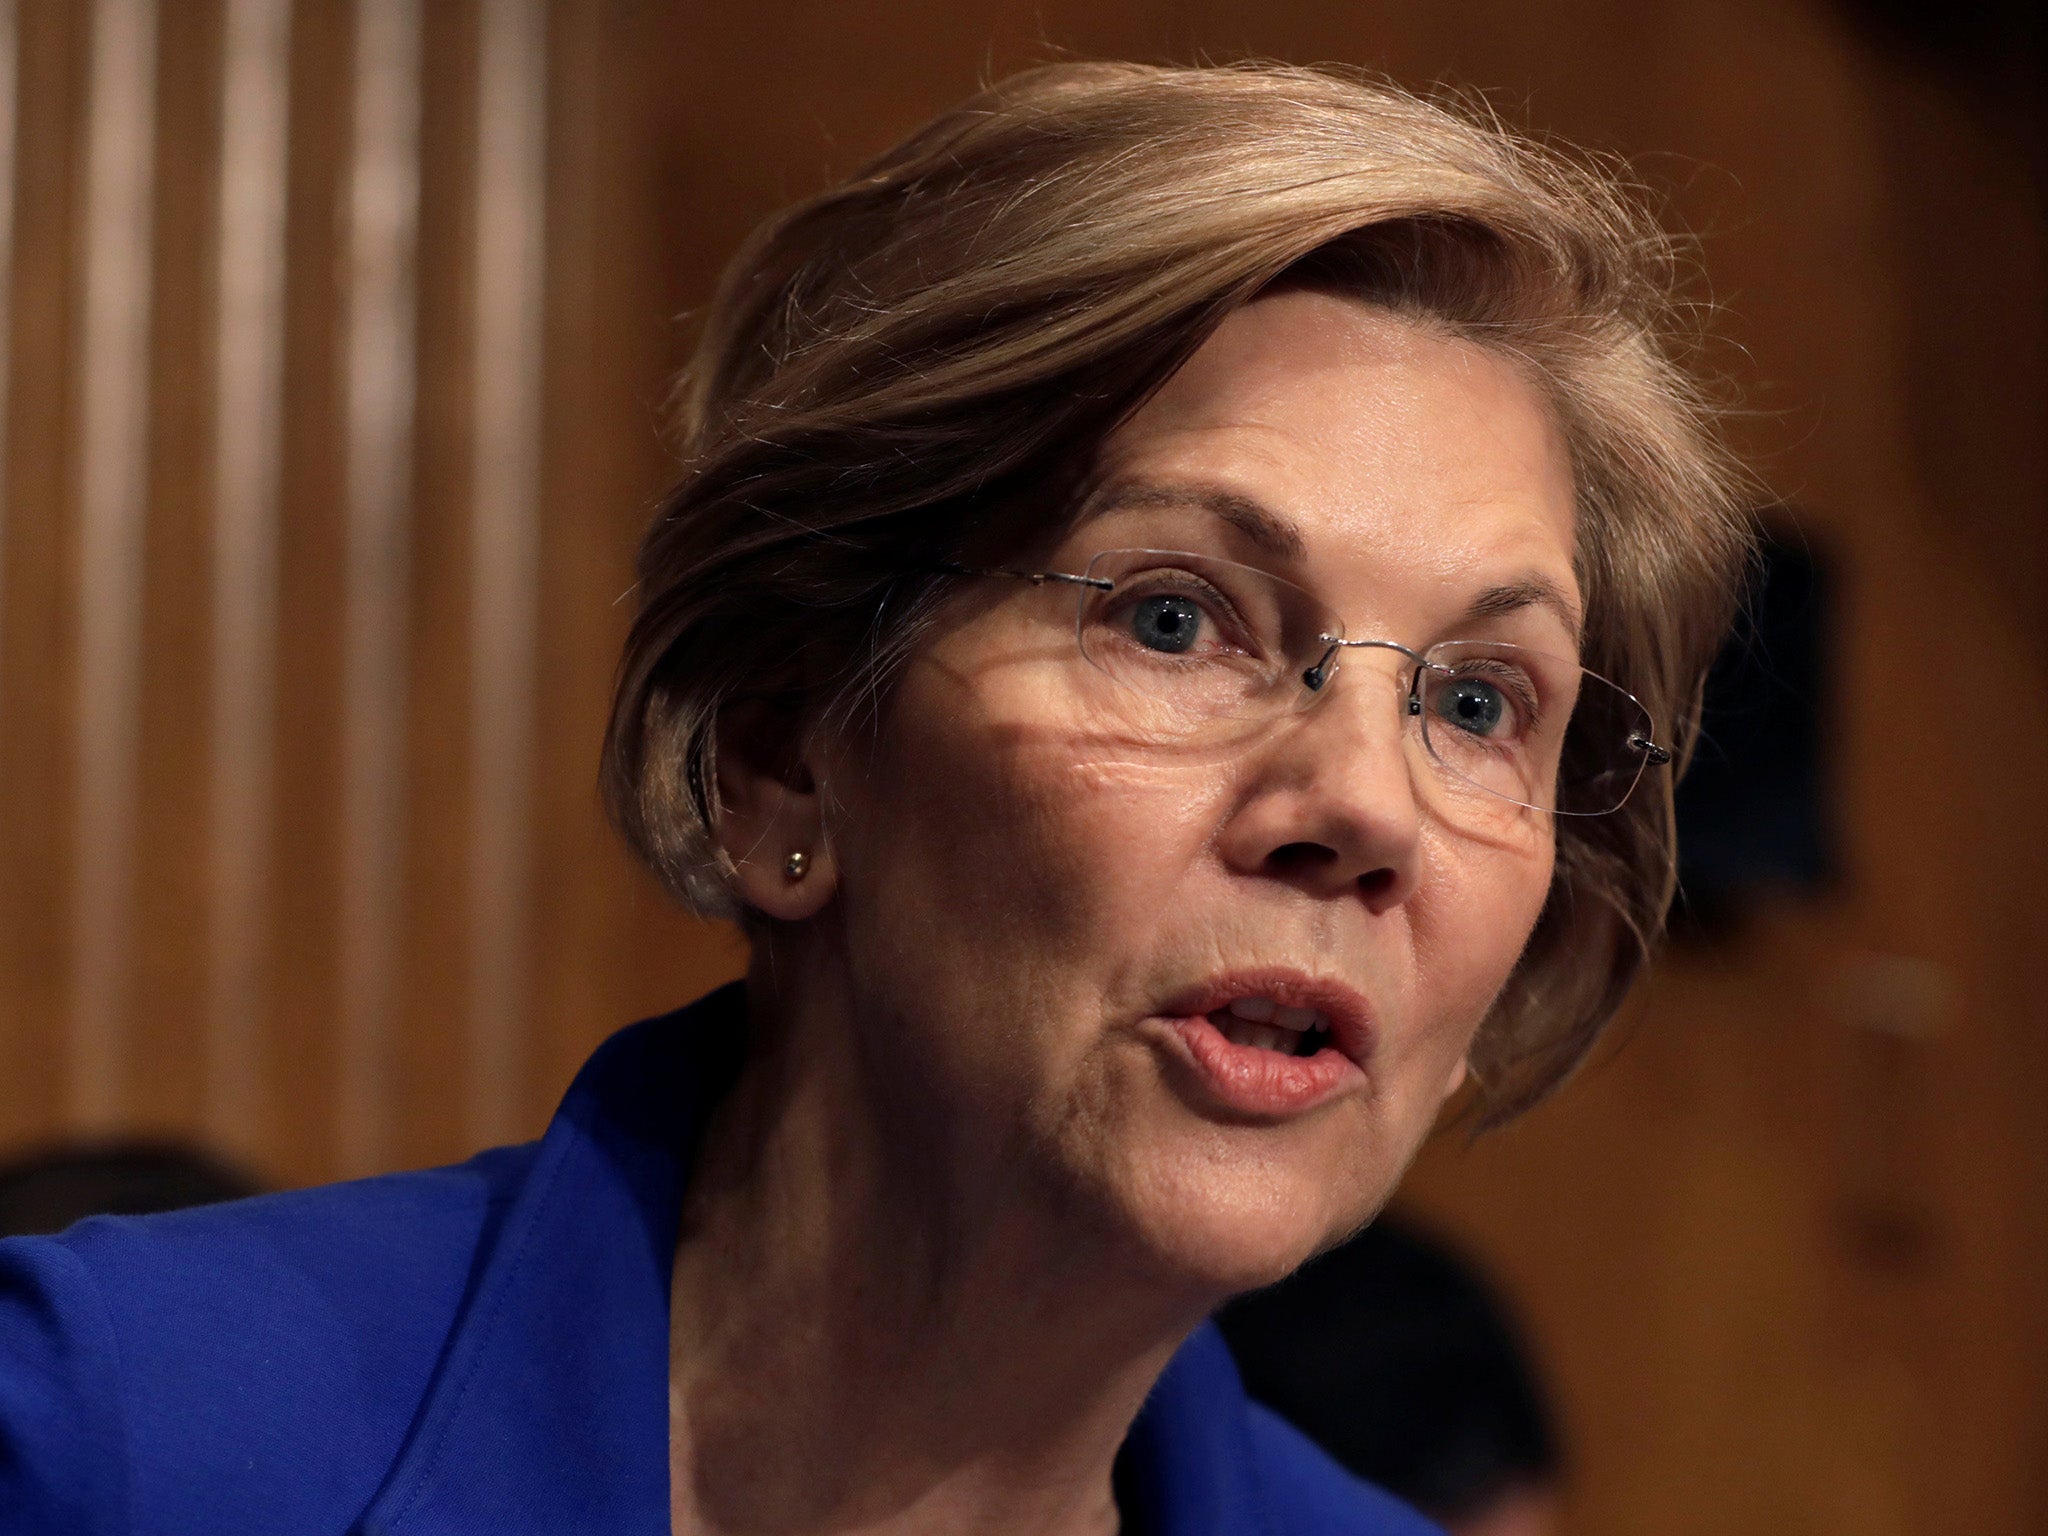 Elizabeth Warren is among the most liberal Democratic senators and is noted for her work on economic-fairness issues